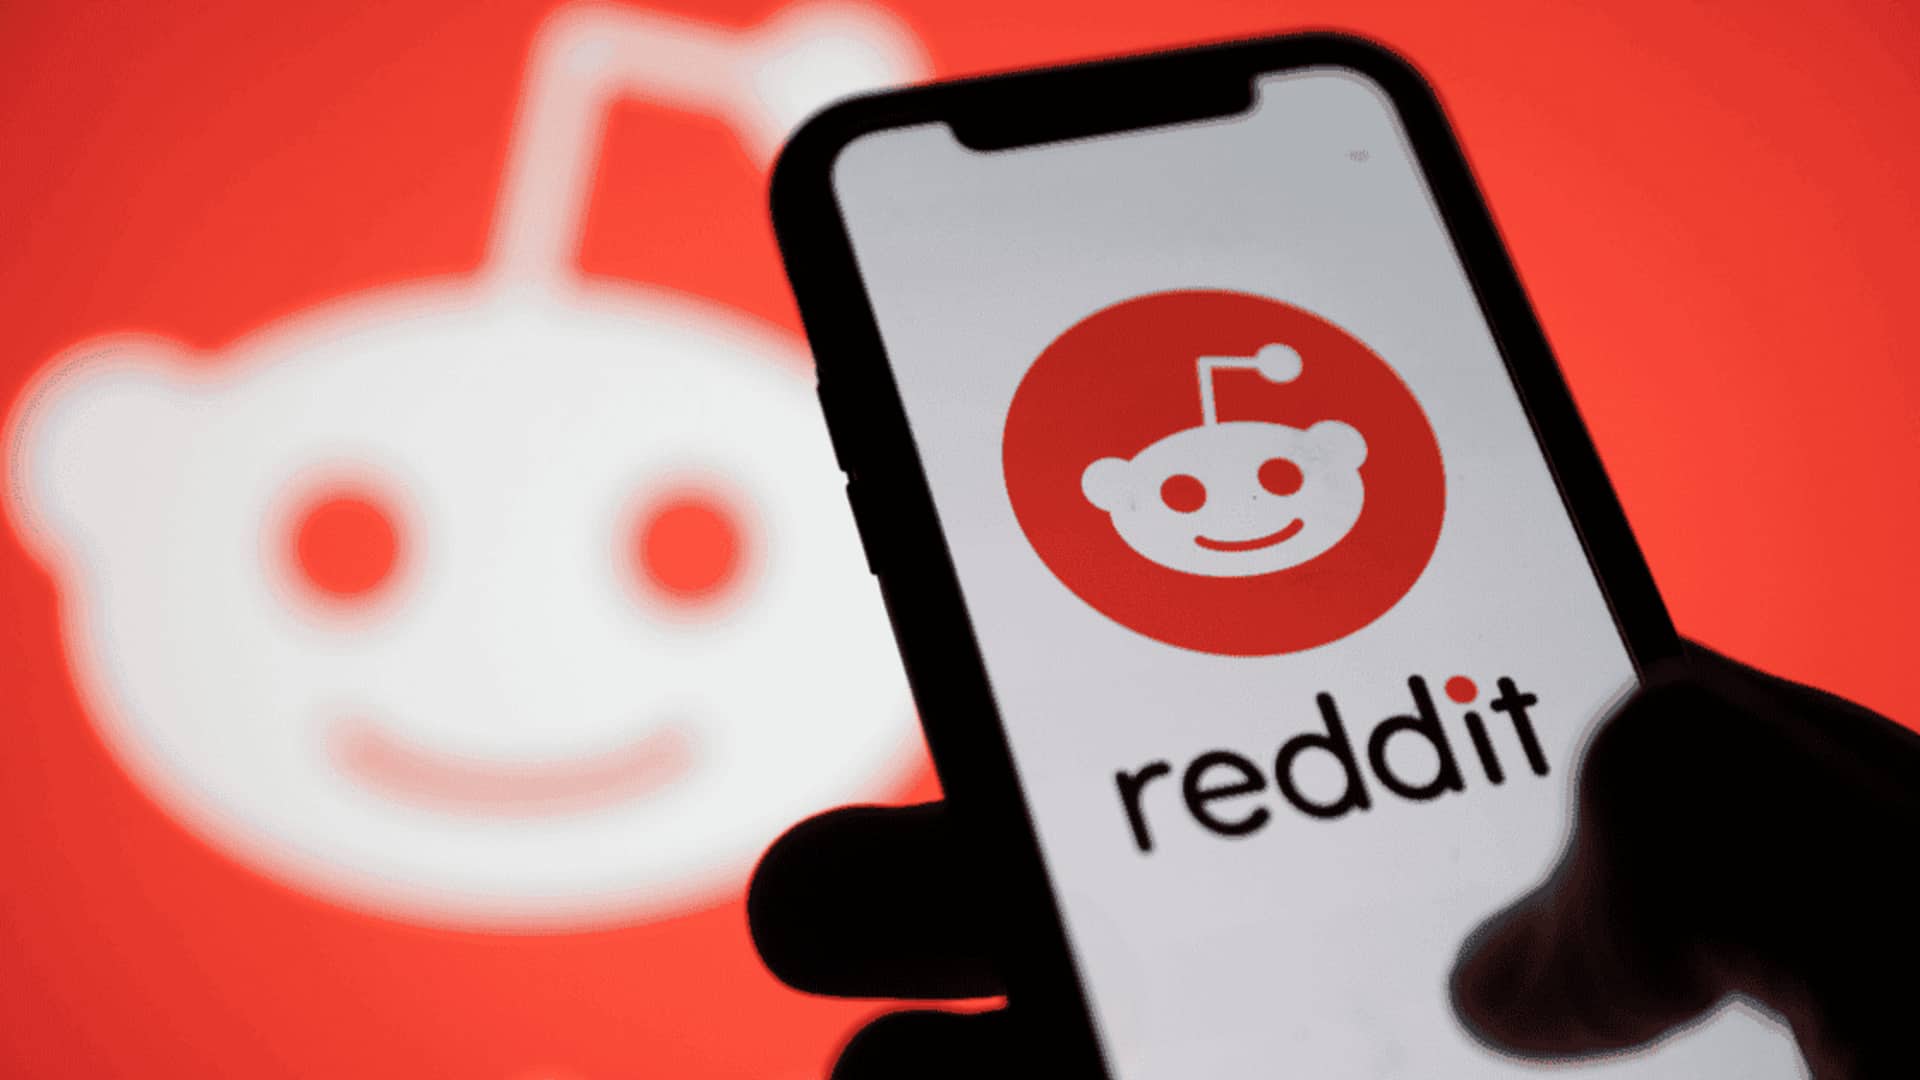 Why Reddit's IPO is not enticing its users